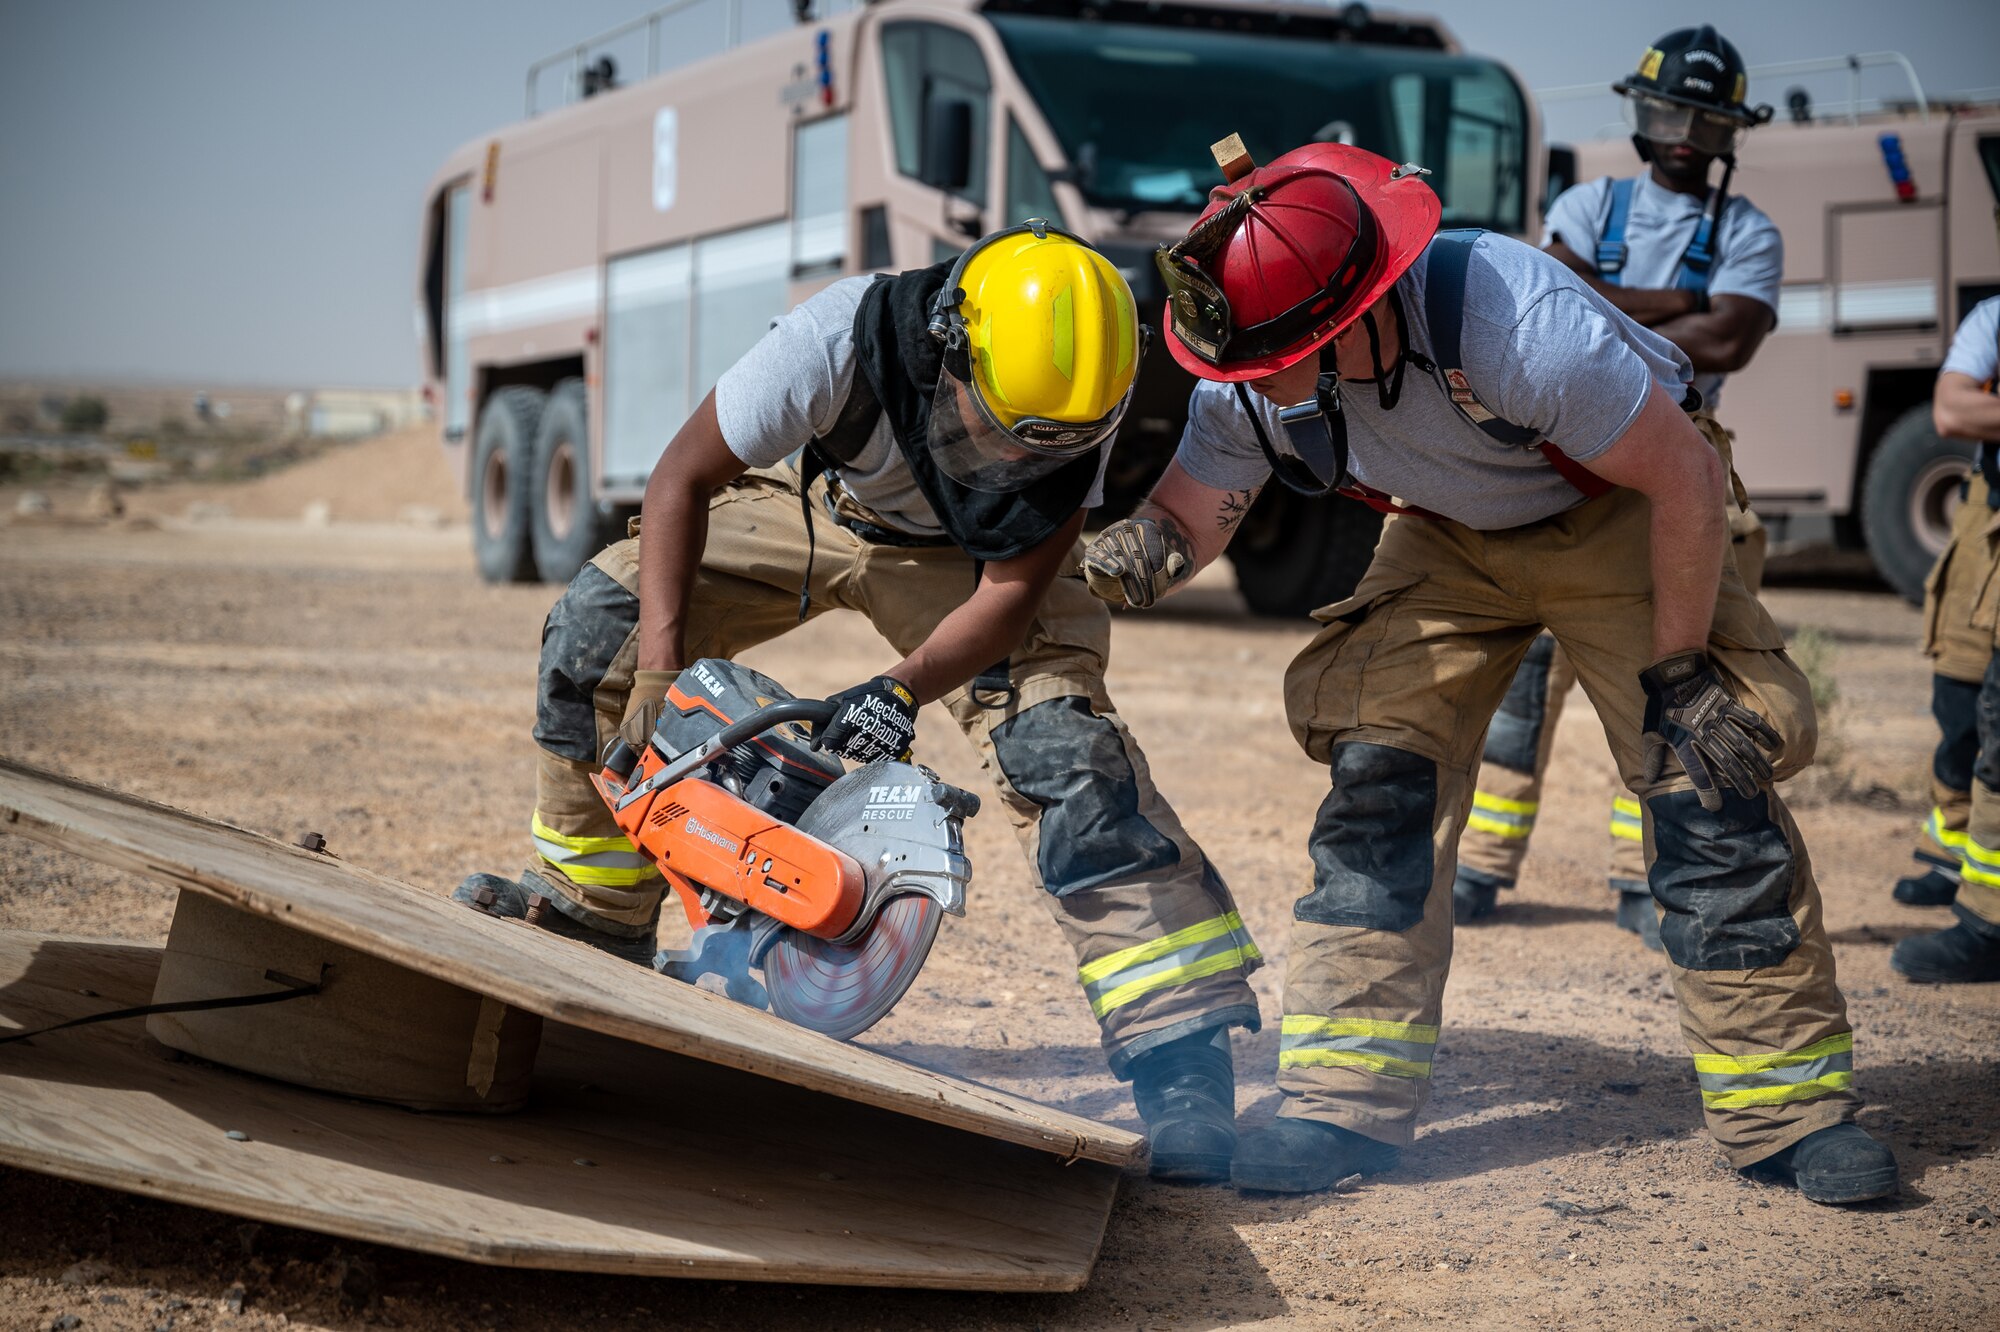 Airman First Class Melvin Turner, 332d Expeditionary Civil Engineer Squadron firefighter, receives on-the-job training from Tech. Sgt. Joseph Donahue, 332d ECES firefighter, while operating a rotary saw during live-fire flashover training at an undisclosed location in Southwest Asia, April 30, 2022. (U.S. Air Force photo by Master Sgt. Christopher Parr)